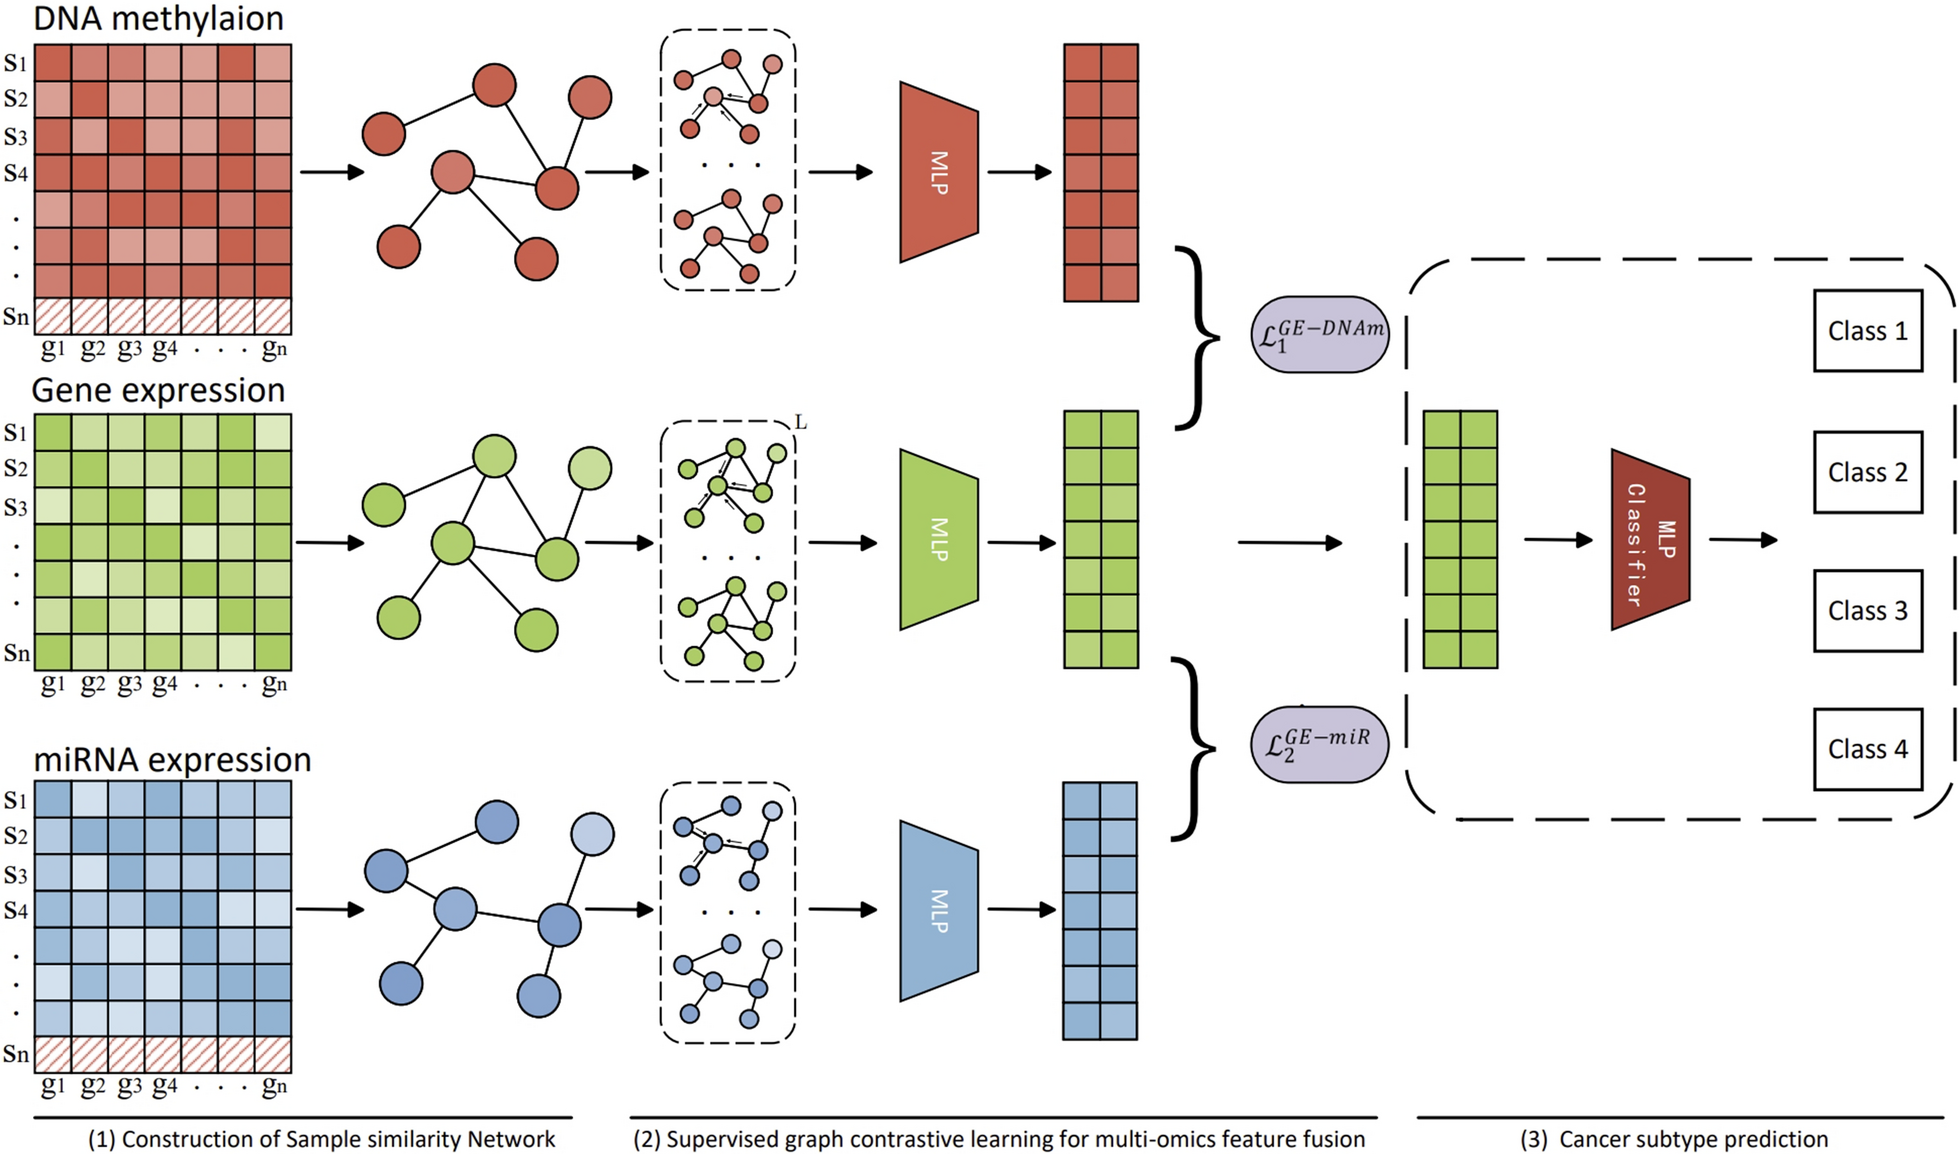 Supervised graph contrastive learning for cancer subtype identification through multi-omics data integration